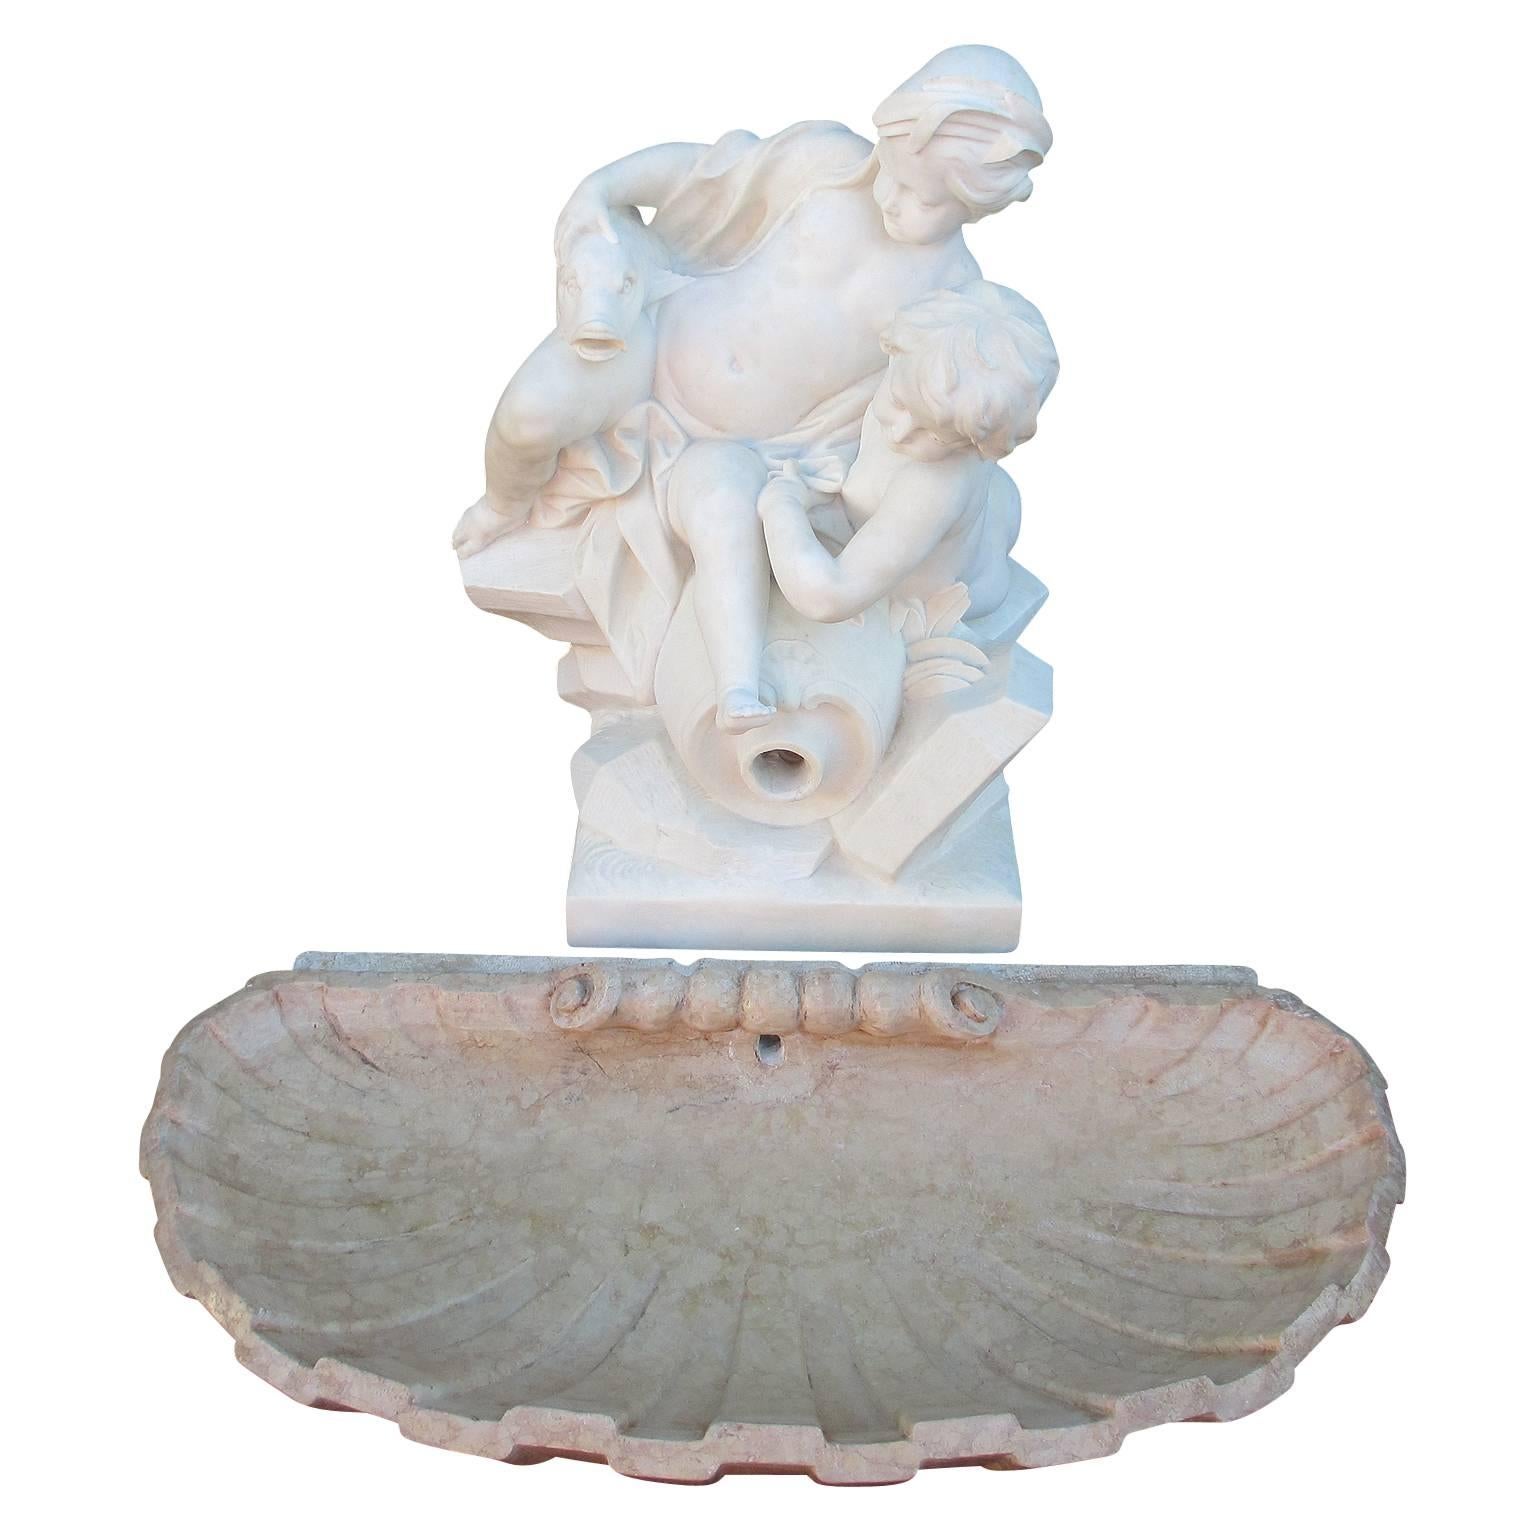 A fine and charming French 19th century carved white marble allegorical garden fountain group of two playful putti seated on a rocky outcrop with an upturned amphora supporting a stylized fish, drilled for water, together with a Rosso Verona marble